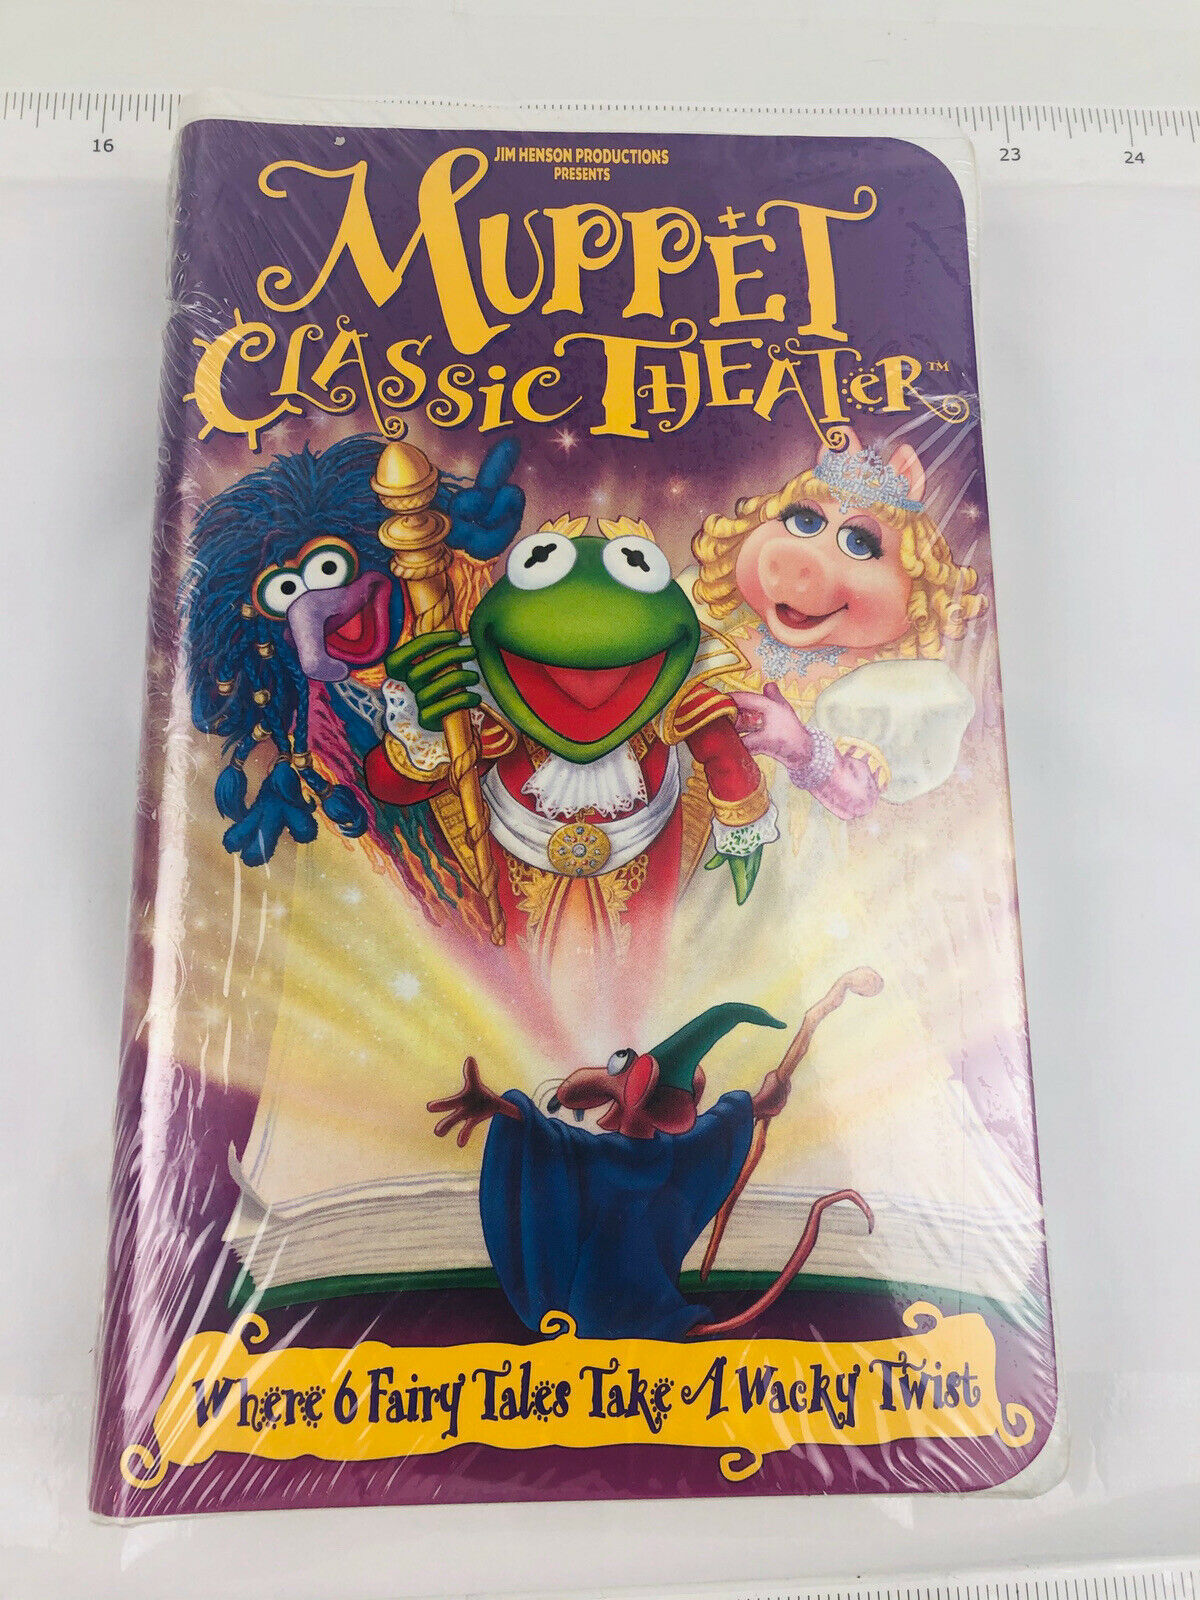 Muppet Classic Theater Brand New VHS 1994 Clamshell Case Sealed Jim ...